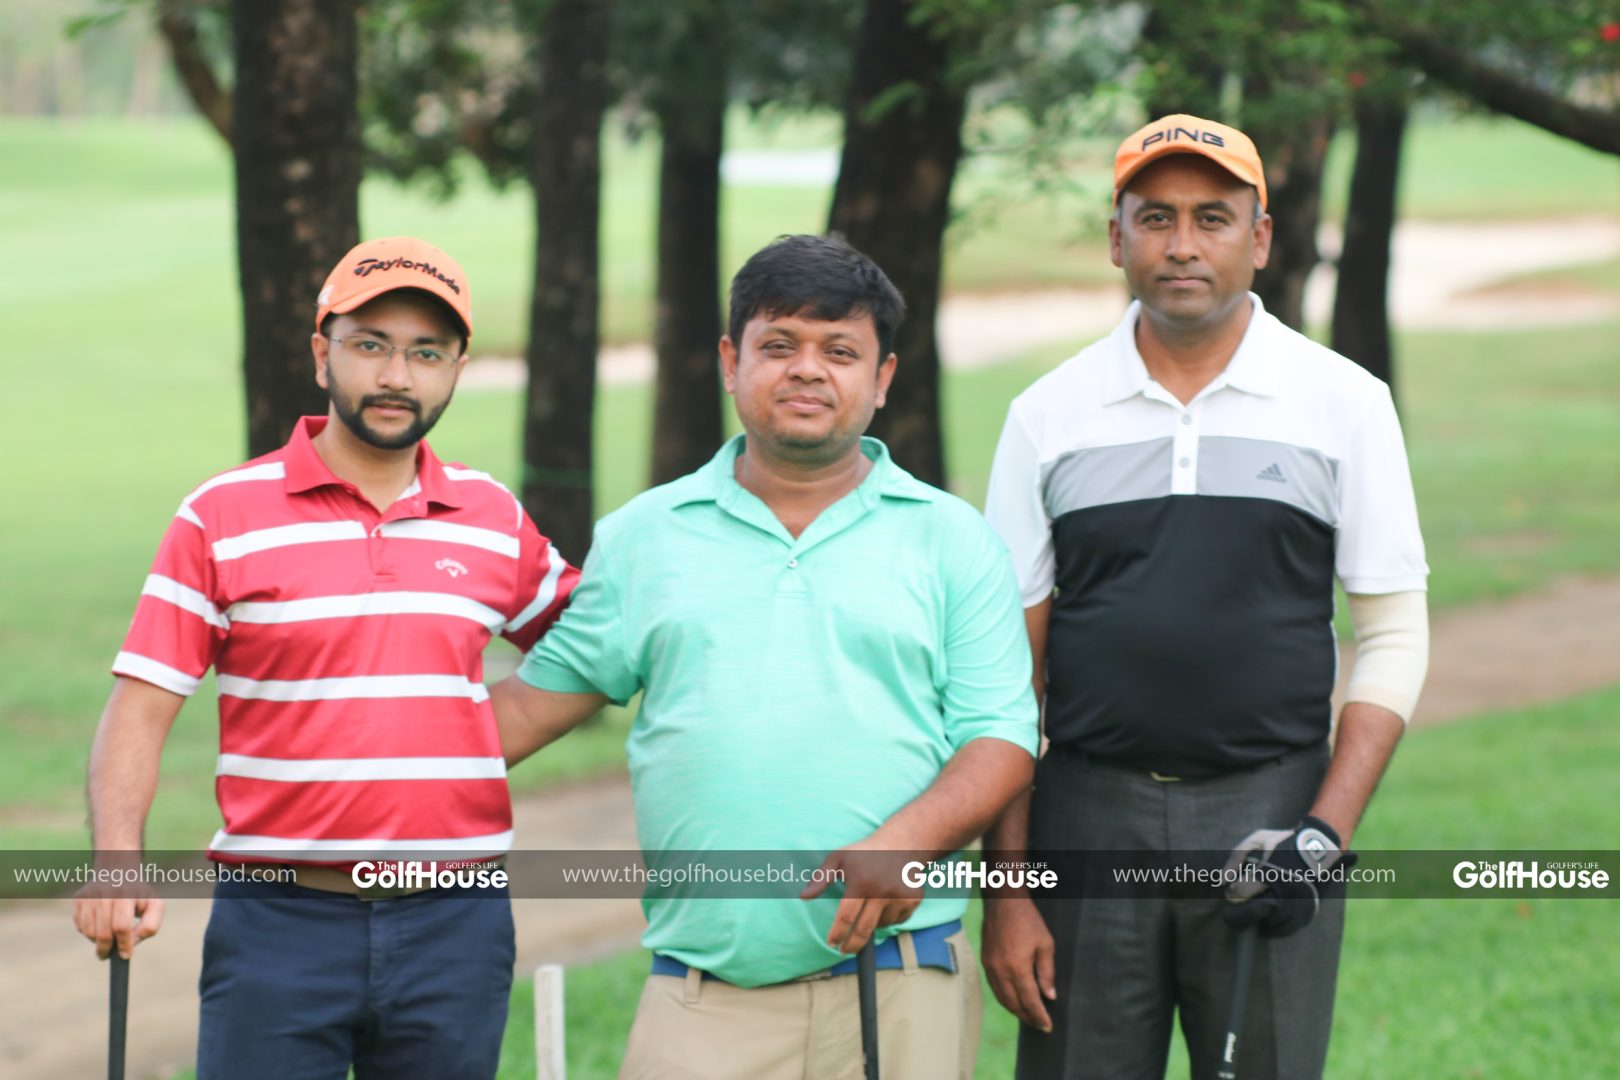 Nazmul_Hasan_is_an_amateur_golfer_of_the_country_who_started_playing_the_game_while_trying_to_make_use_of_his_ample_leisure_time.